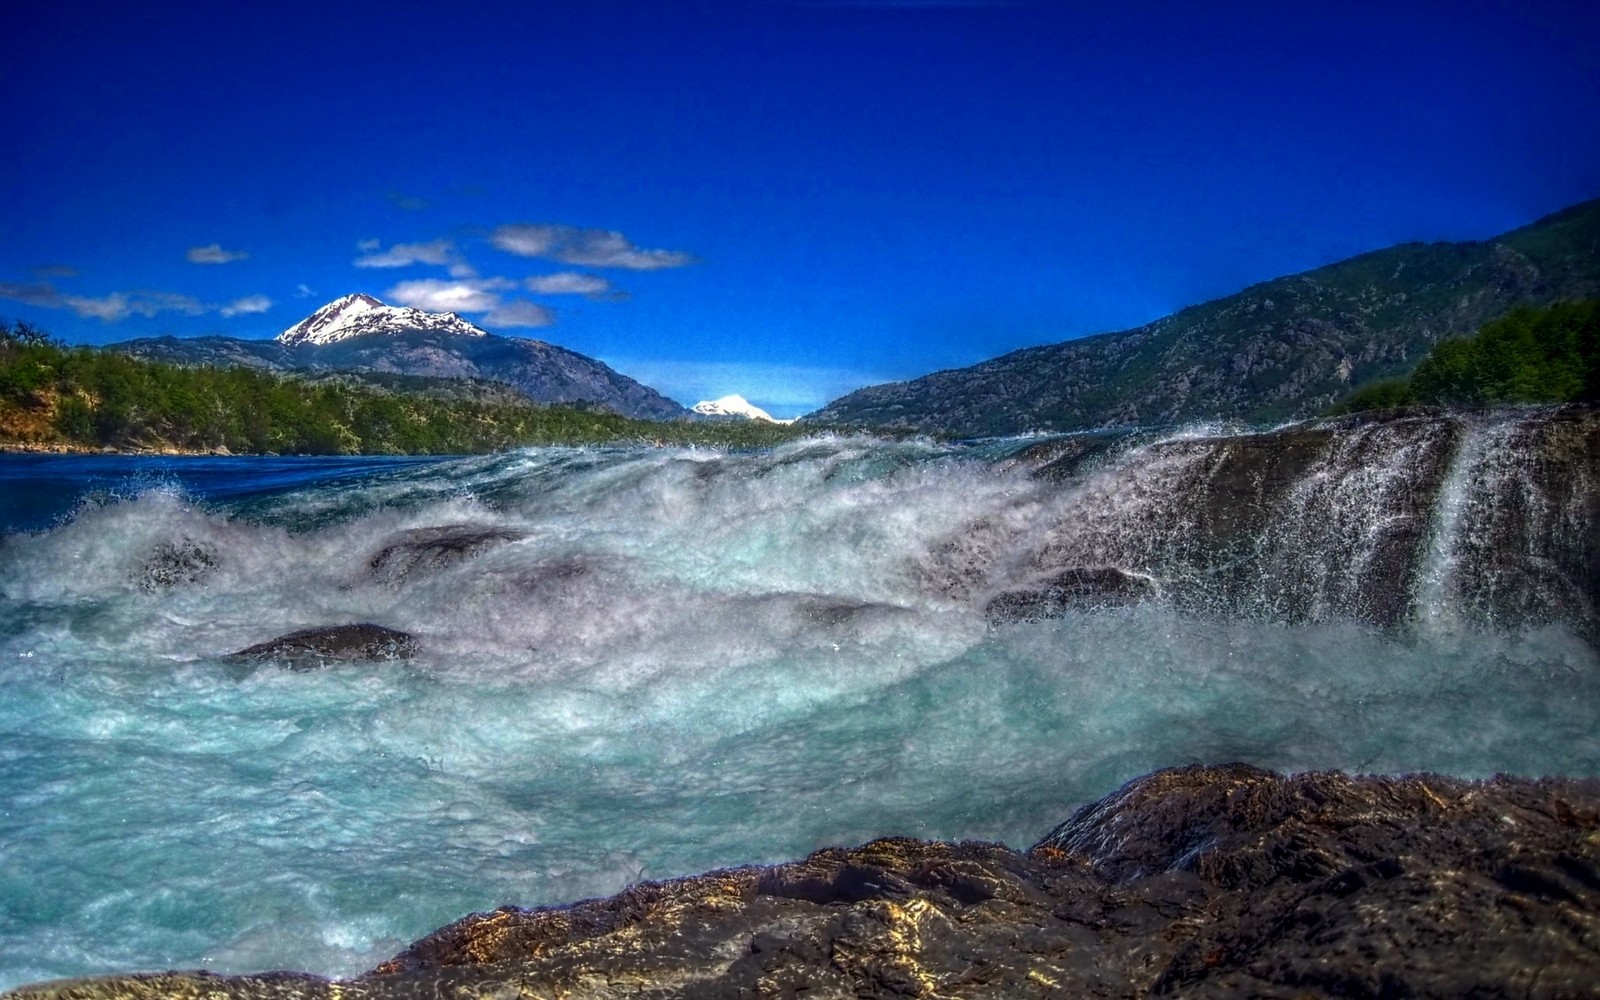 General 1600x1000 photography nature landscape blue sky river rapids waterfall mountains snowy peak Patagonia Chile